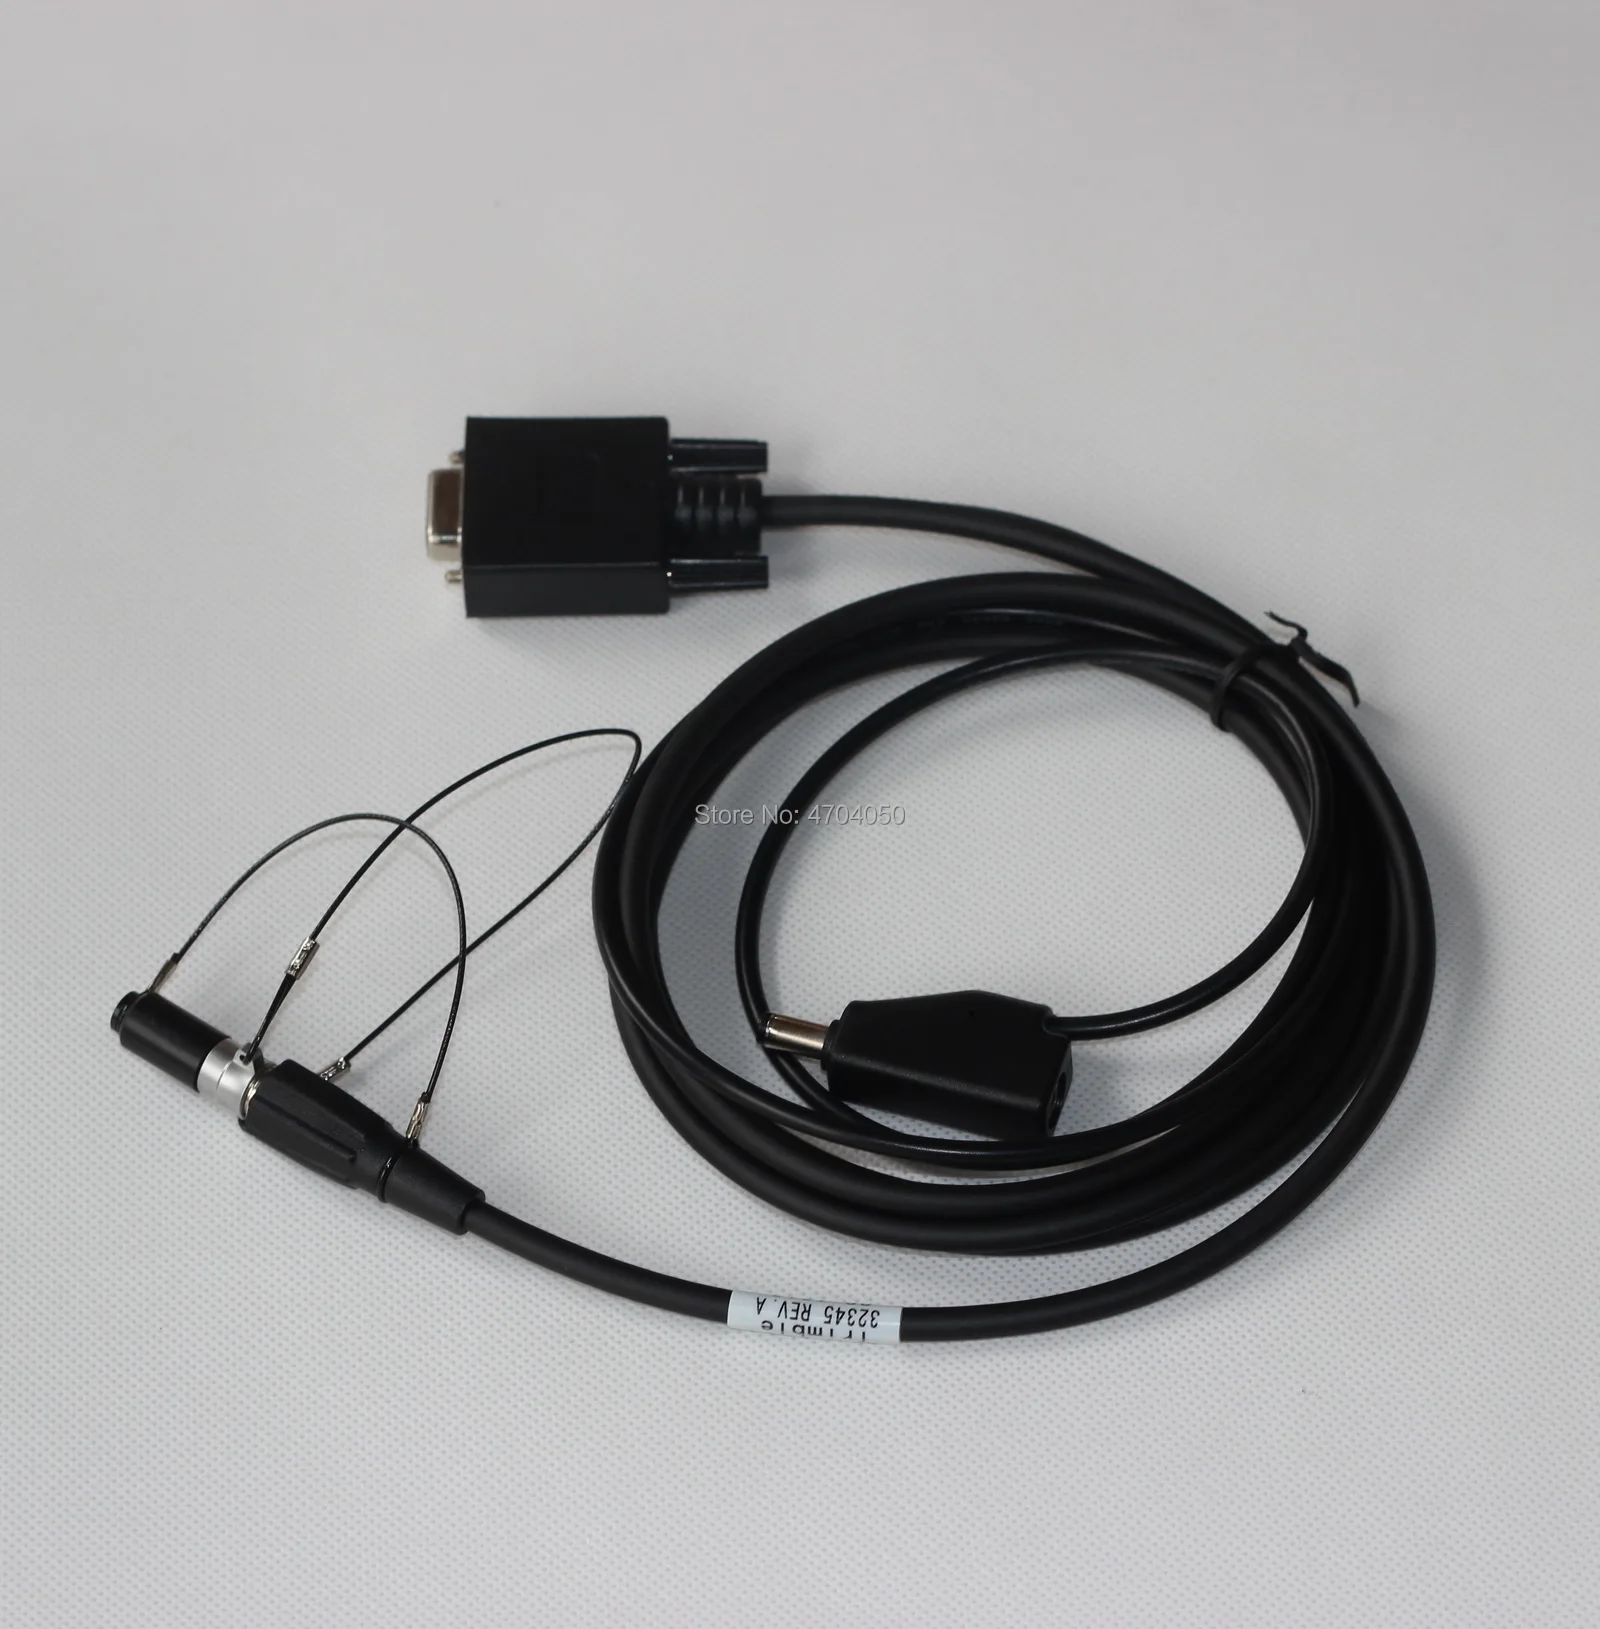 

NEW Trimble 32345 /59044 Power cable GPS data cable for Trimble 5700/5800//R6/R7/R8 total station